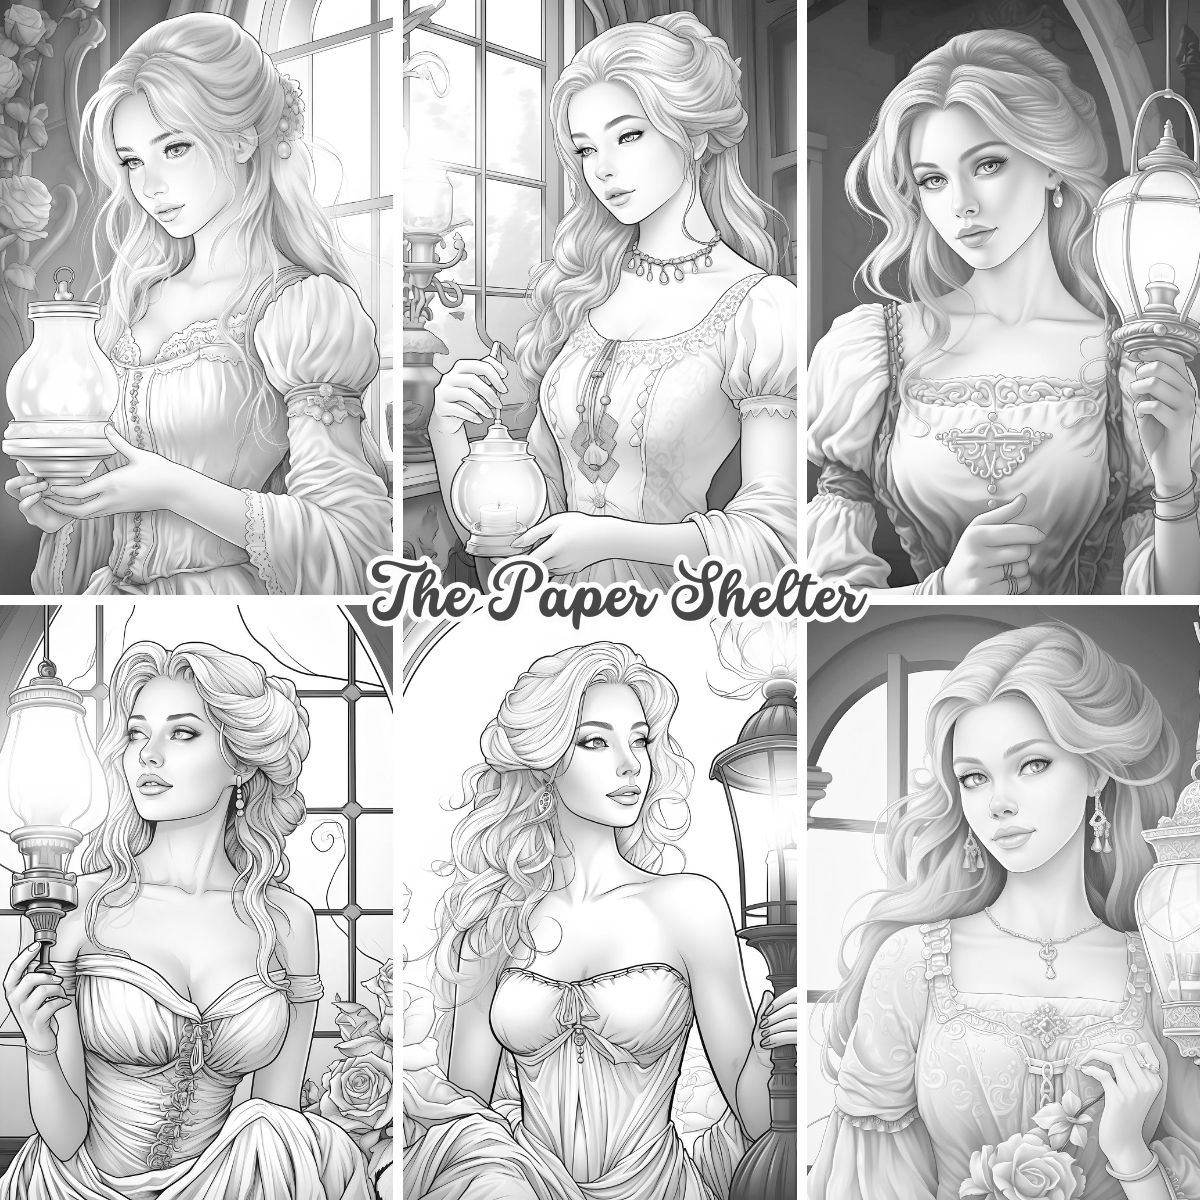 Ladies With Lamps - Digital Coloring Book - Click Image to Close